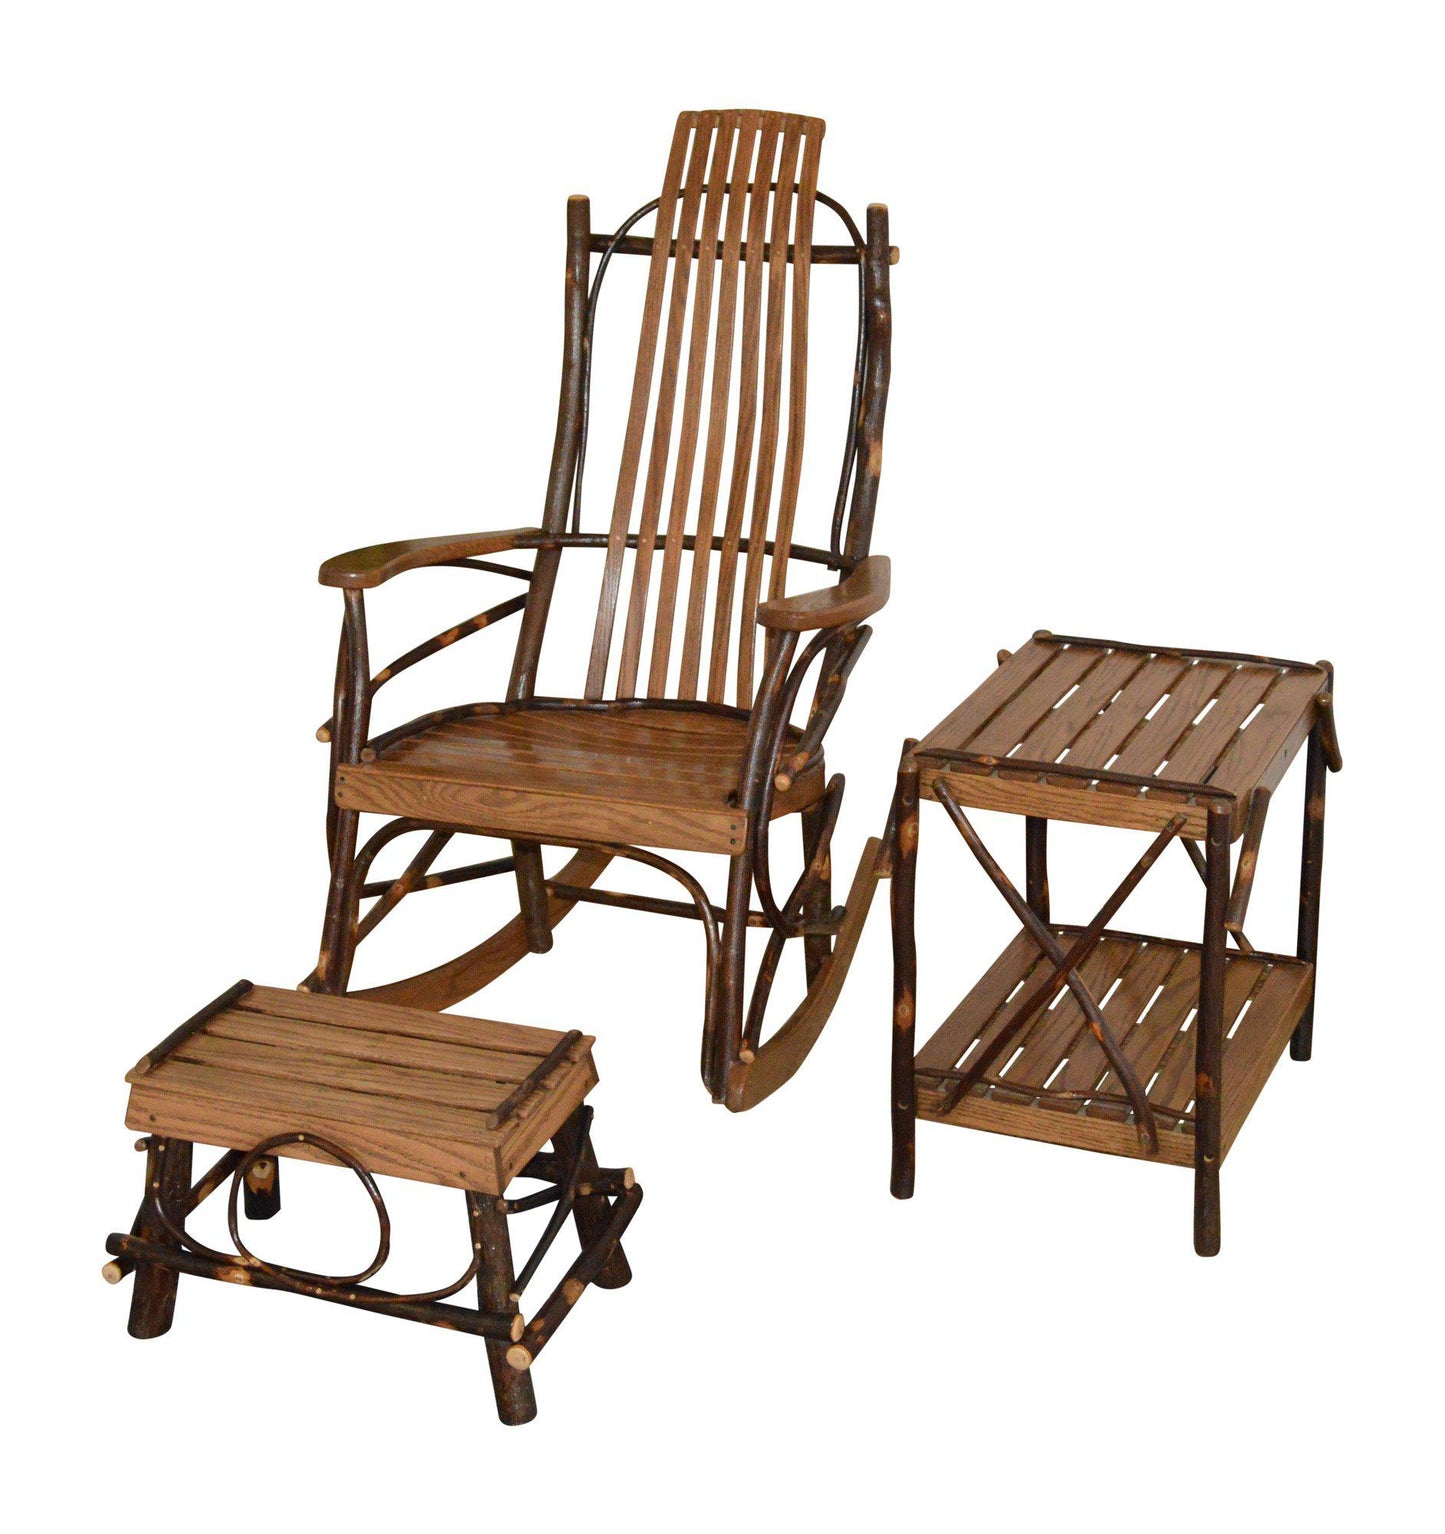 A&L Furniture Co. Amish Bentwood 7-Slat Hickory Rocking Chair with Foot Stool and End Table Set - LEAD TIME TO SHIP 10 BUSINESS DAYS